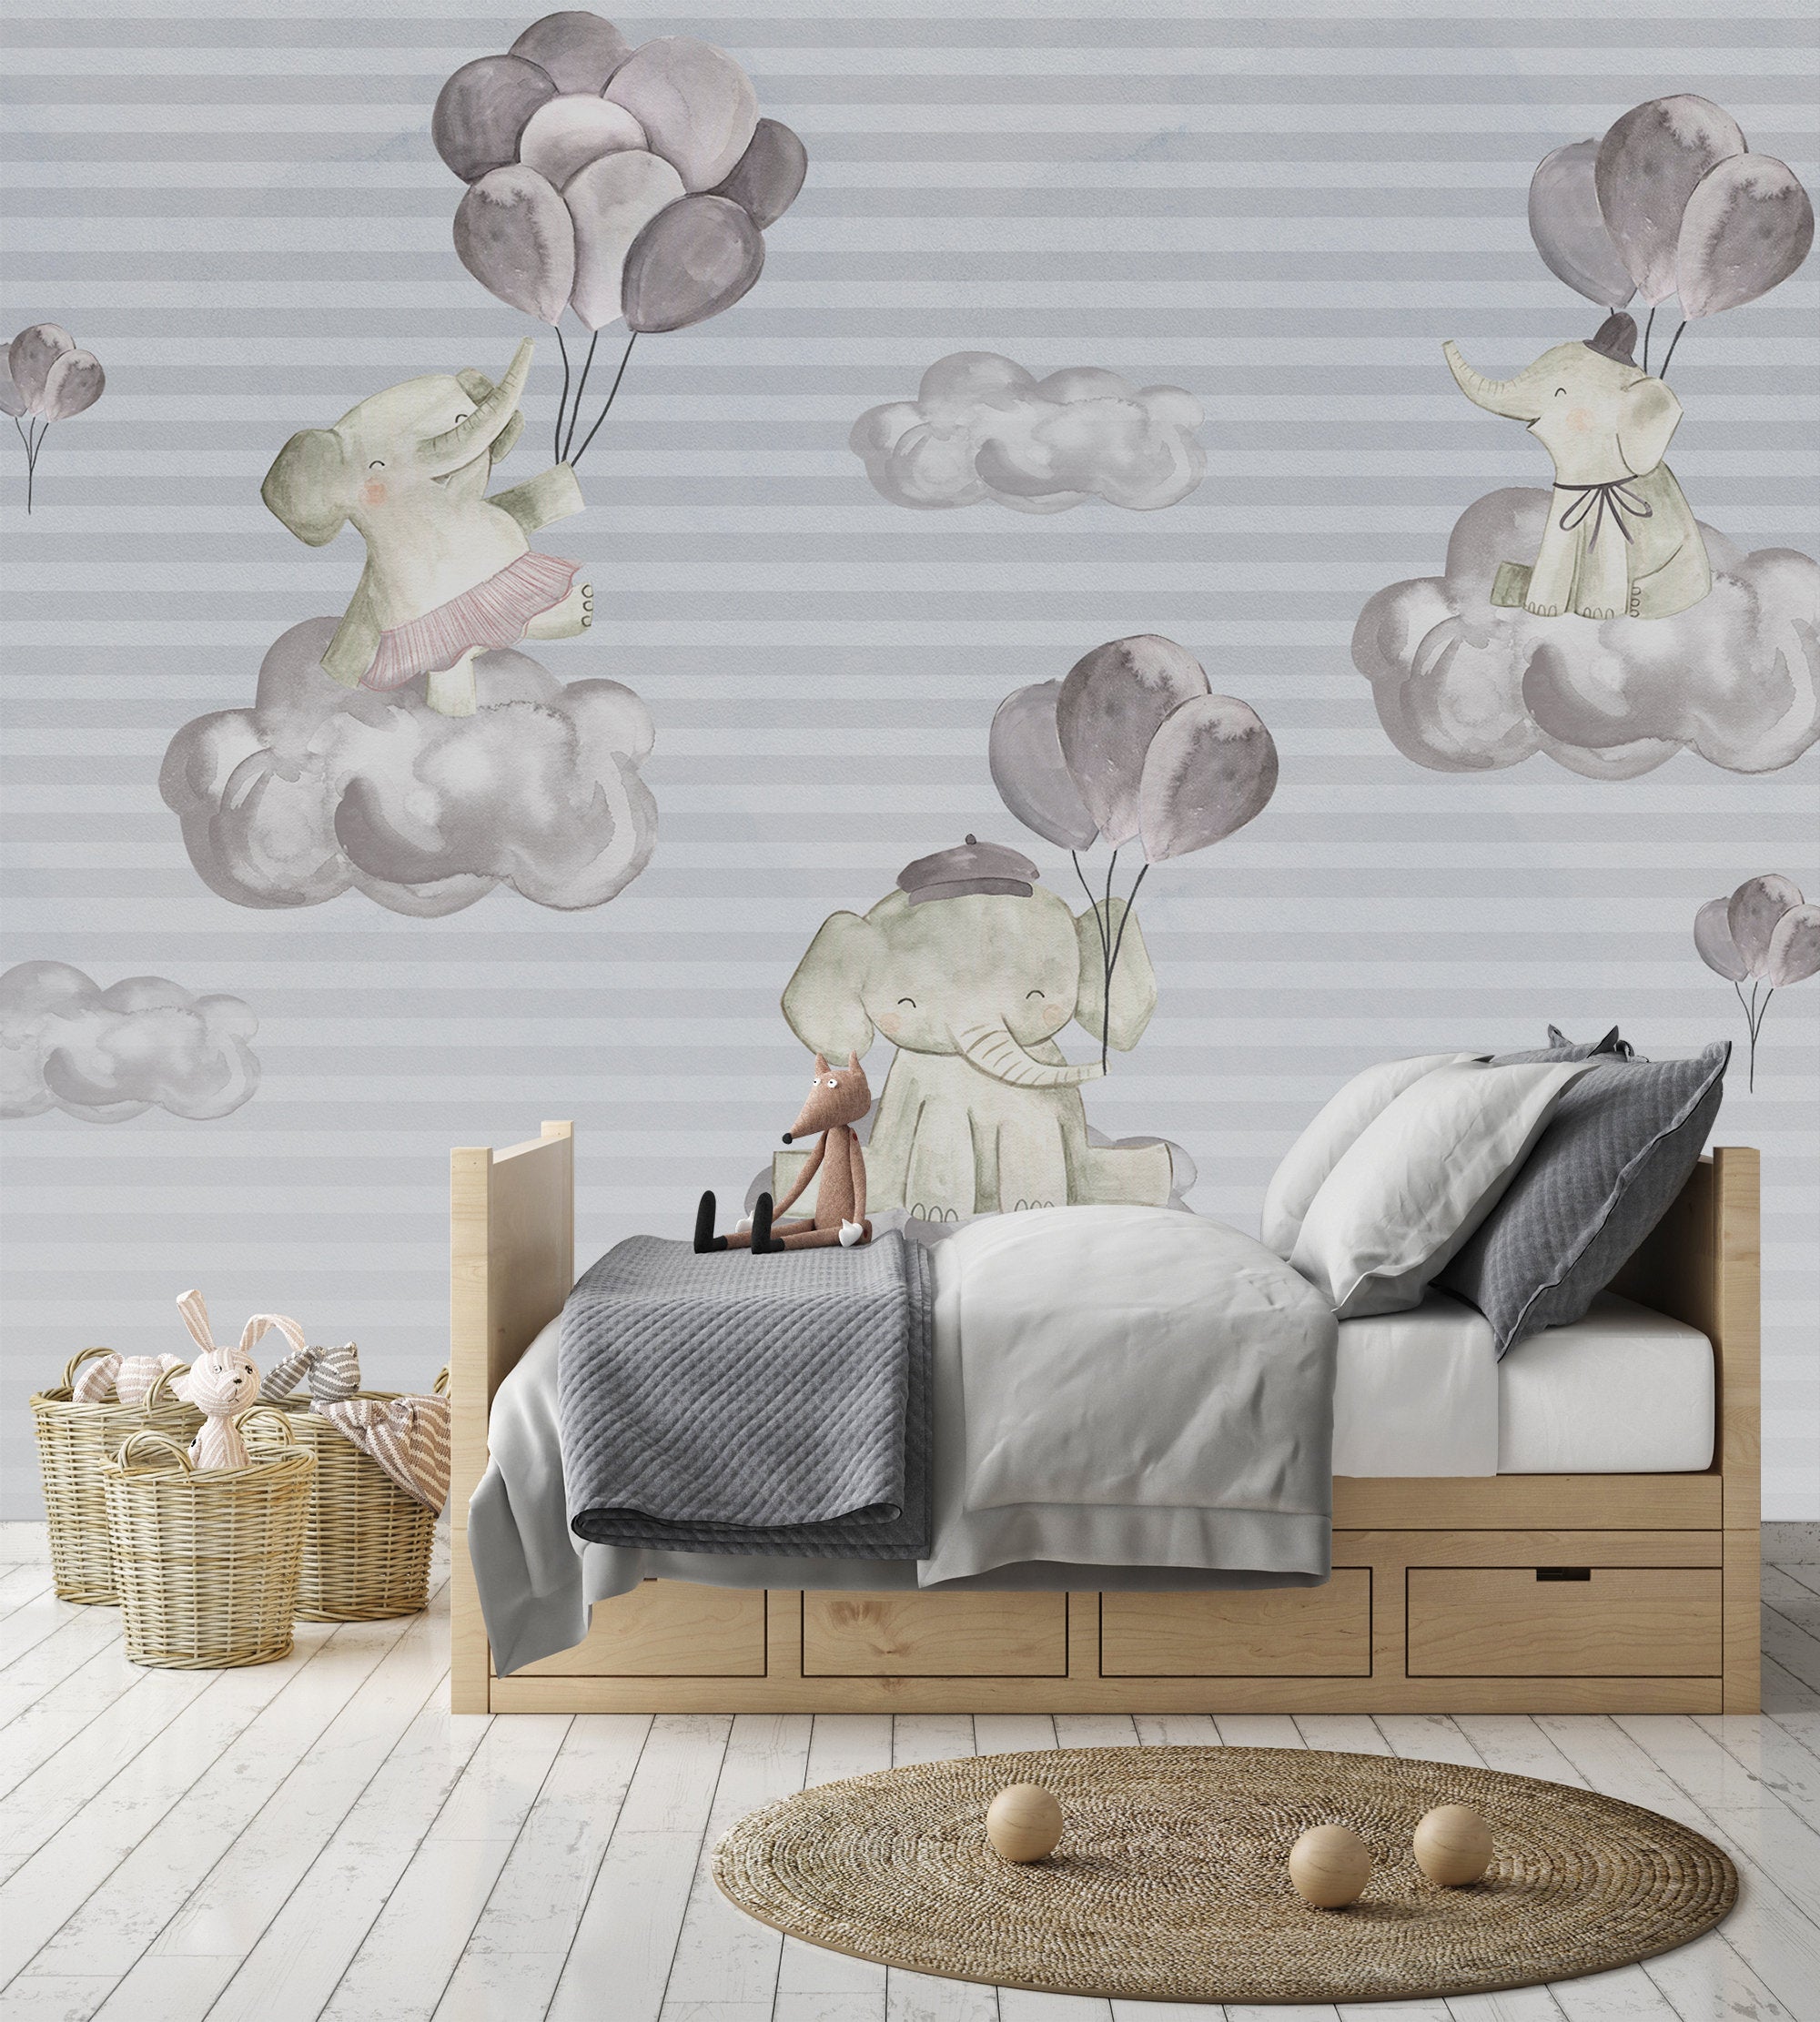 Cute Baby Elephants Above the Clouds Wallpaper Self Adhesive Peel and Stick Wall Sticker Wall Decoration Minimalistic Scandinavian Removable